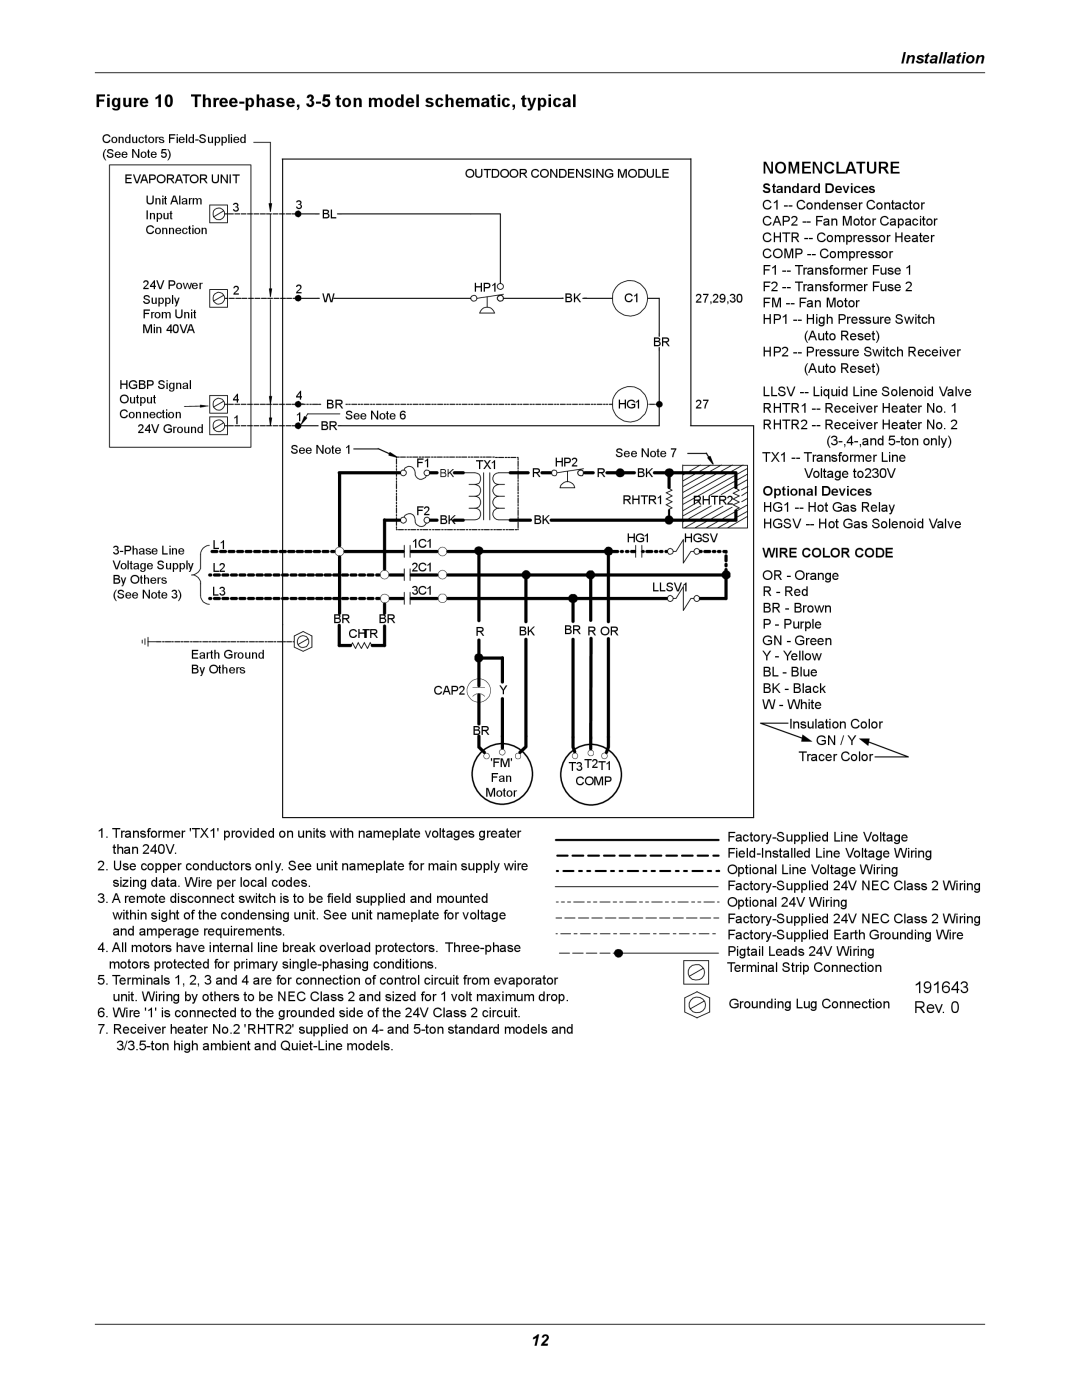 Emerson Figure i manual Installation, Standard Devices, Optional Devices, Wire Color Code 